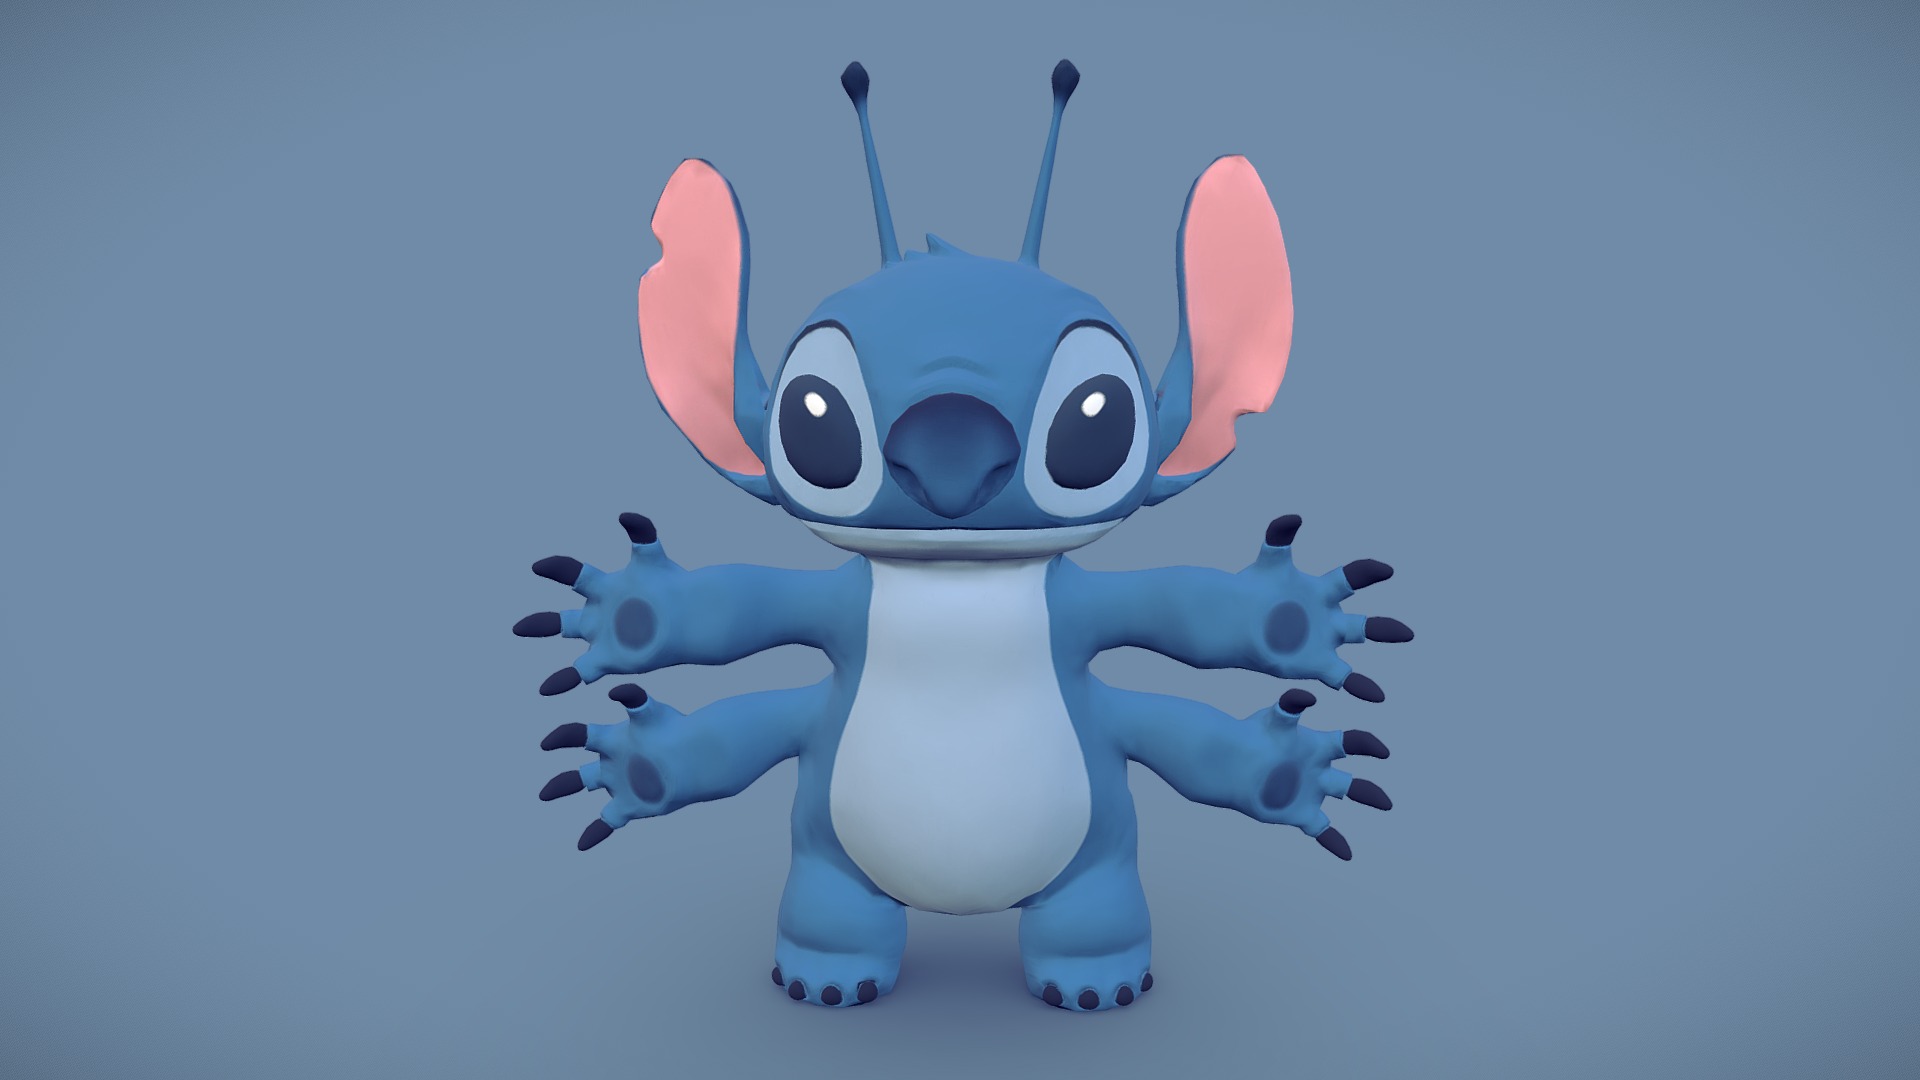 A project I have been working on for the last week. Trying to make this model as similar as I can to the original Stitch from Lilo and Stitch 3d model